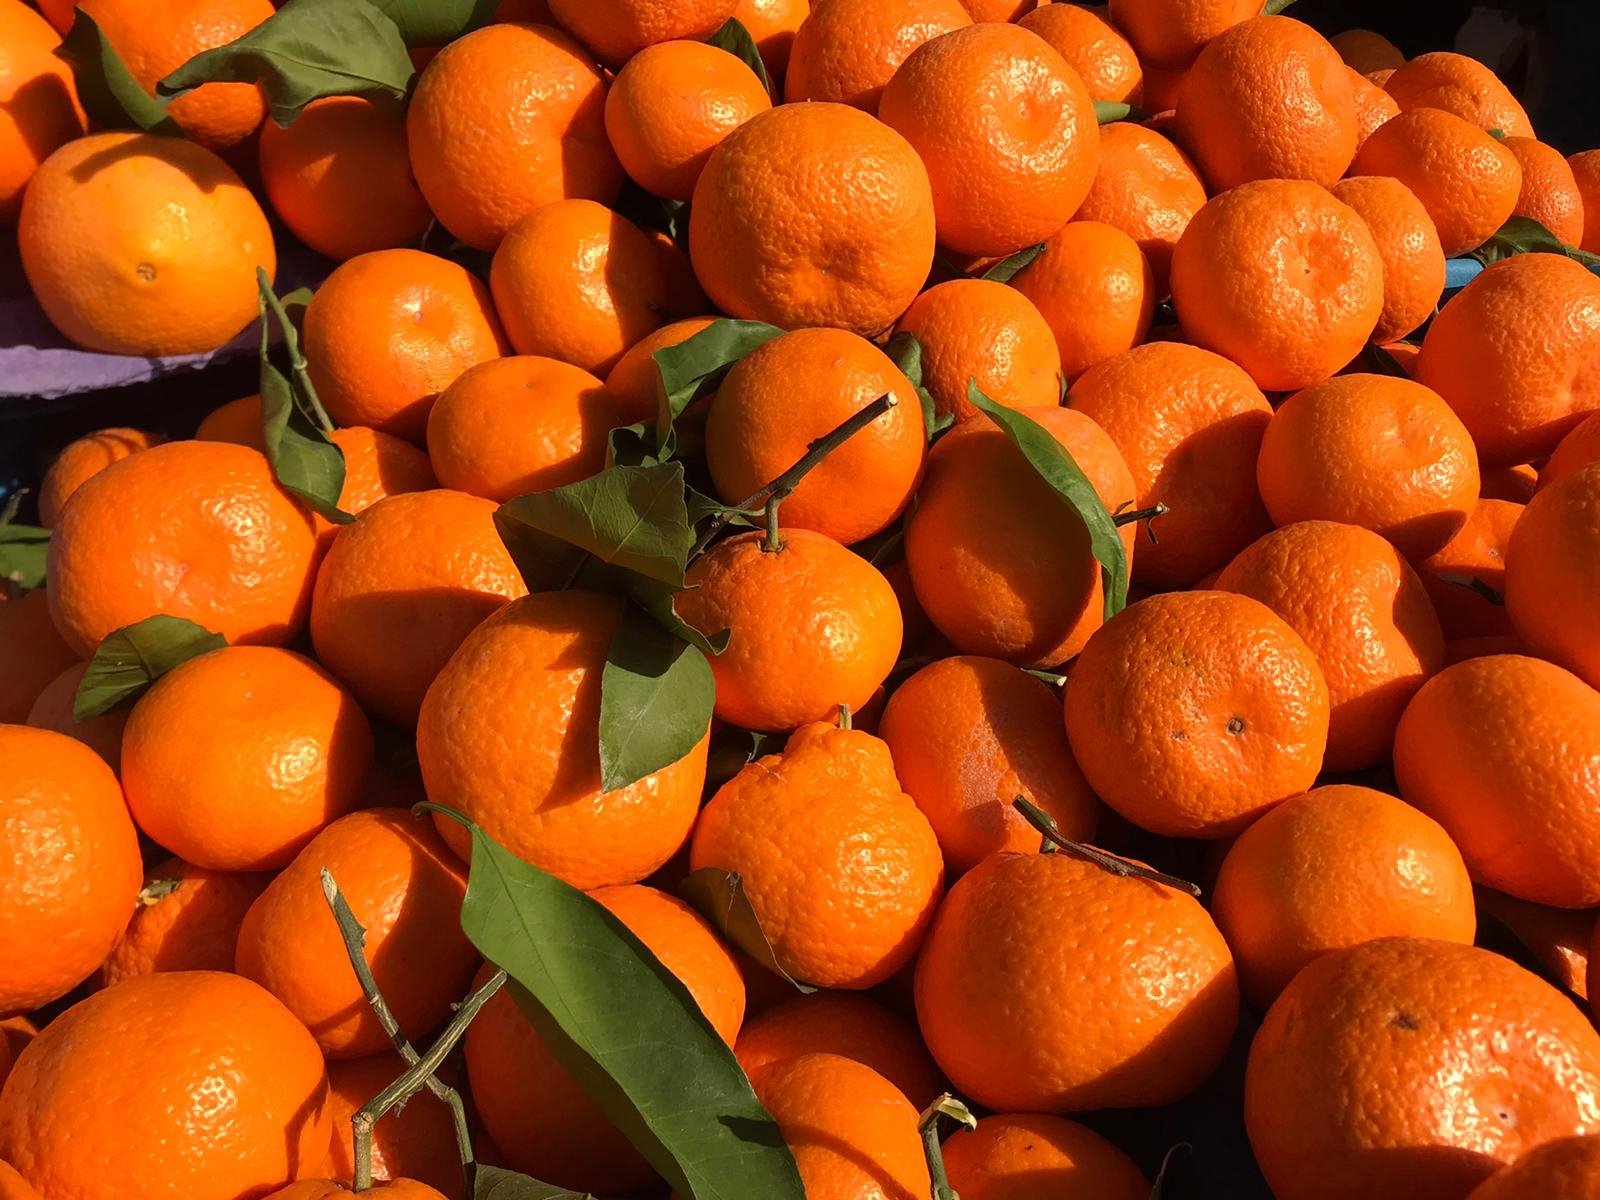 Oranges are seen in this file photo dated Jan. 10, 2020. (AA Photo)